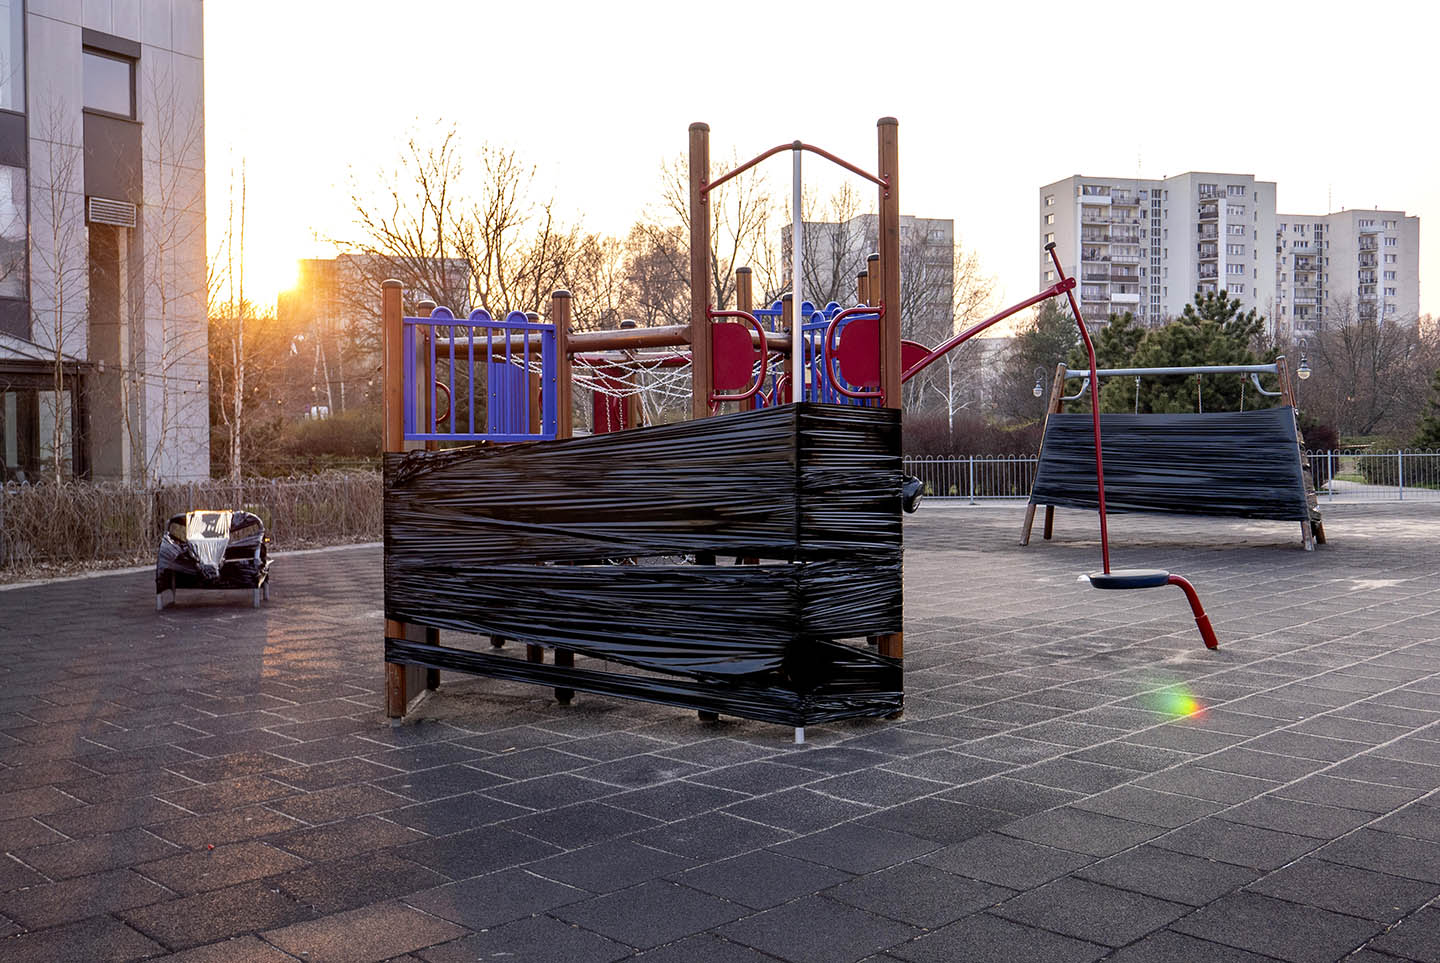 from the series Covid Playgrounds